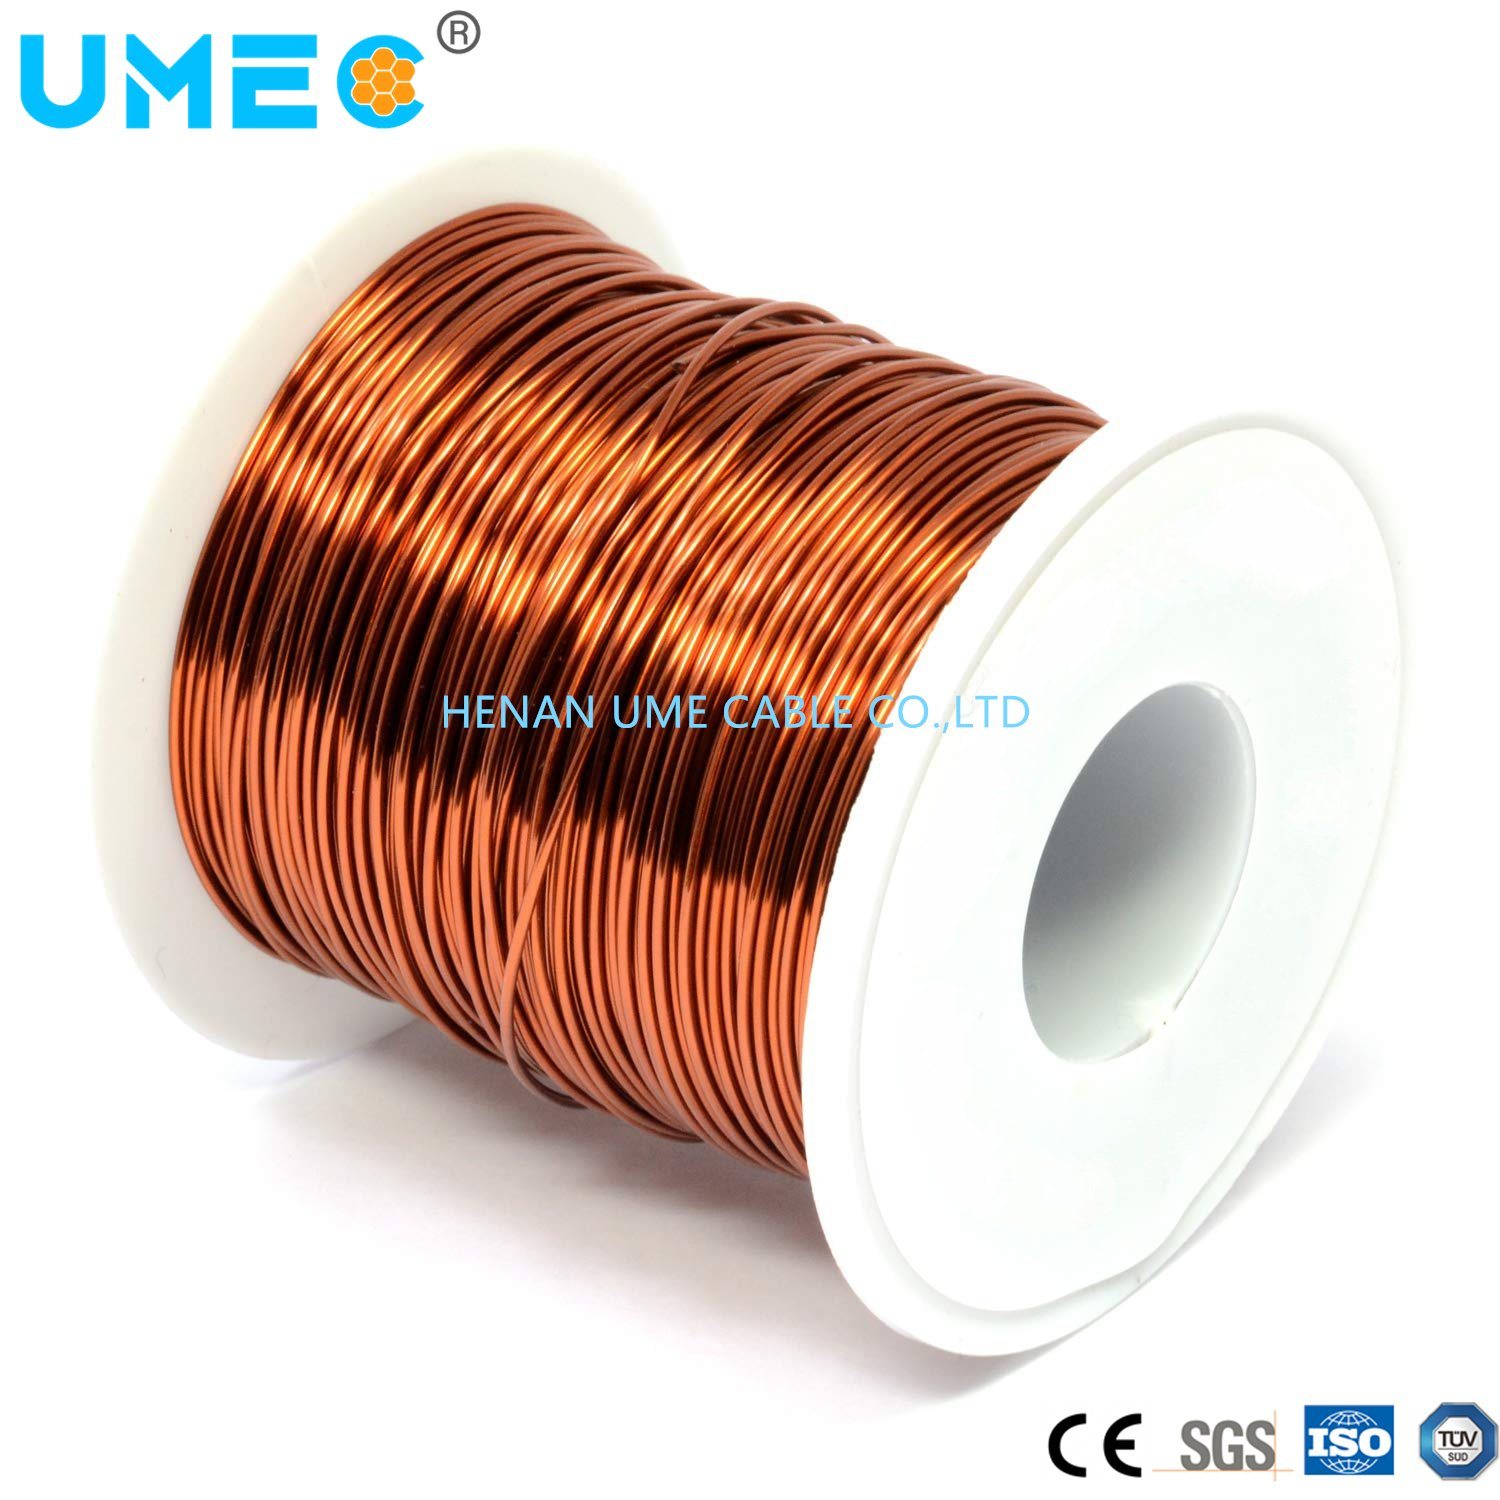 Winding Wire Aluminum/Copper Enameled Magnet Wire Winding Swg AWG Class 130 180 200 220 IEC-60317 Cable Wire